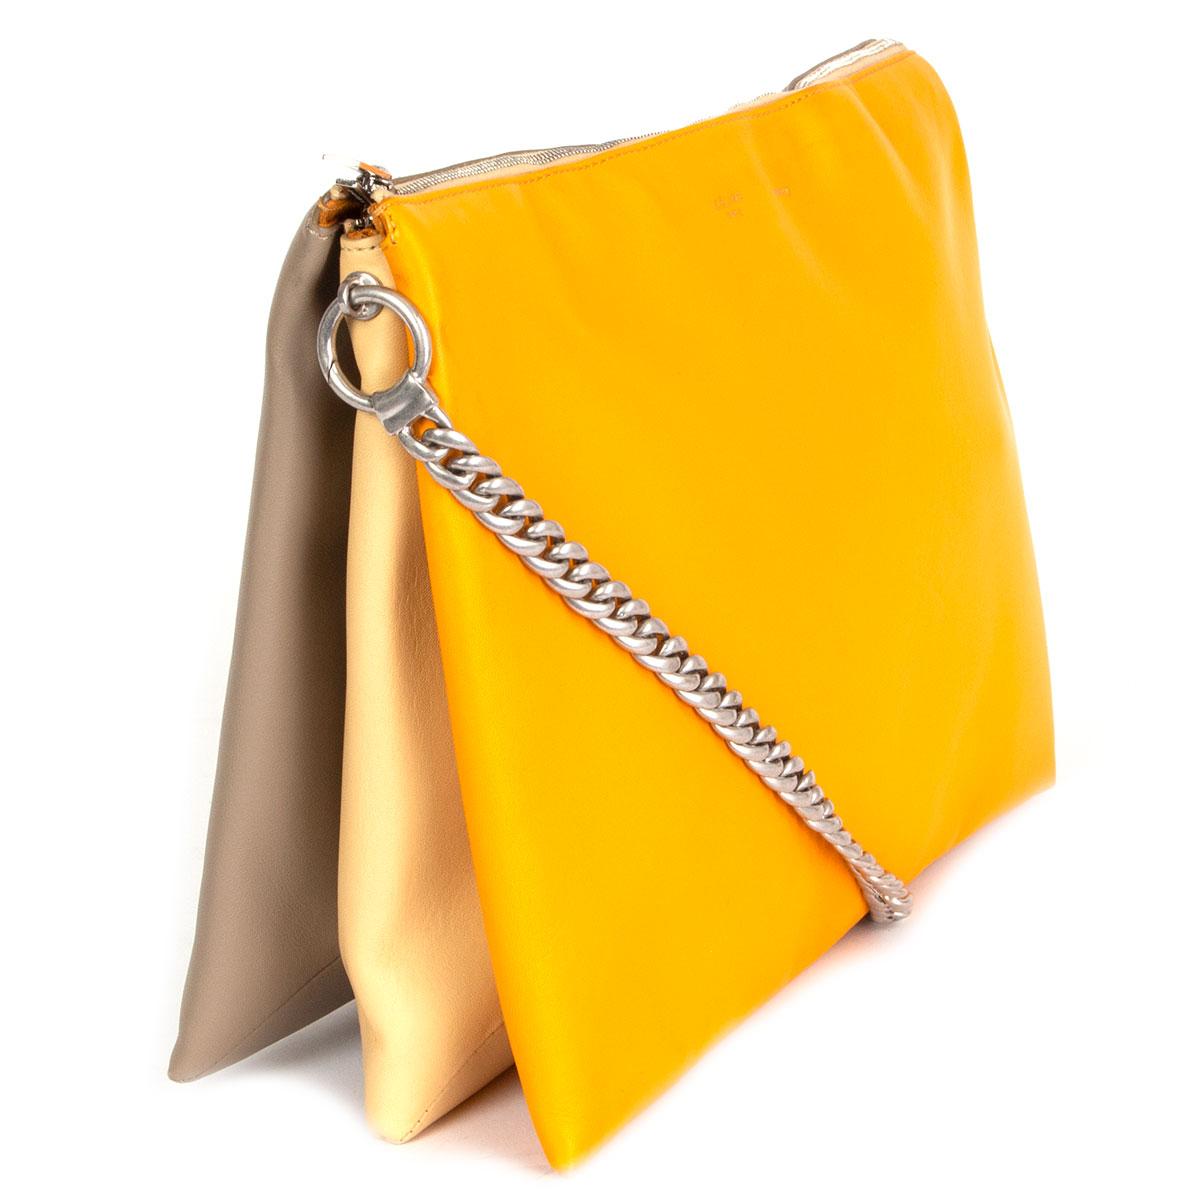 100% authentic Céline 'Soft Trio Chain' shoulder bag in smooth orange, vanilla and taupe calfskin that opens with a zipper on top. Lined in orange suede and divided in three compartments with one big zipper pocket in the middle. Silver-tone metal